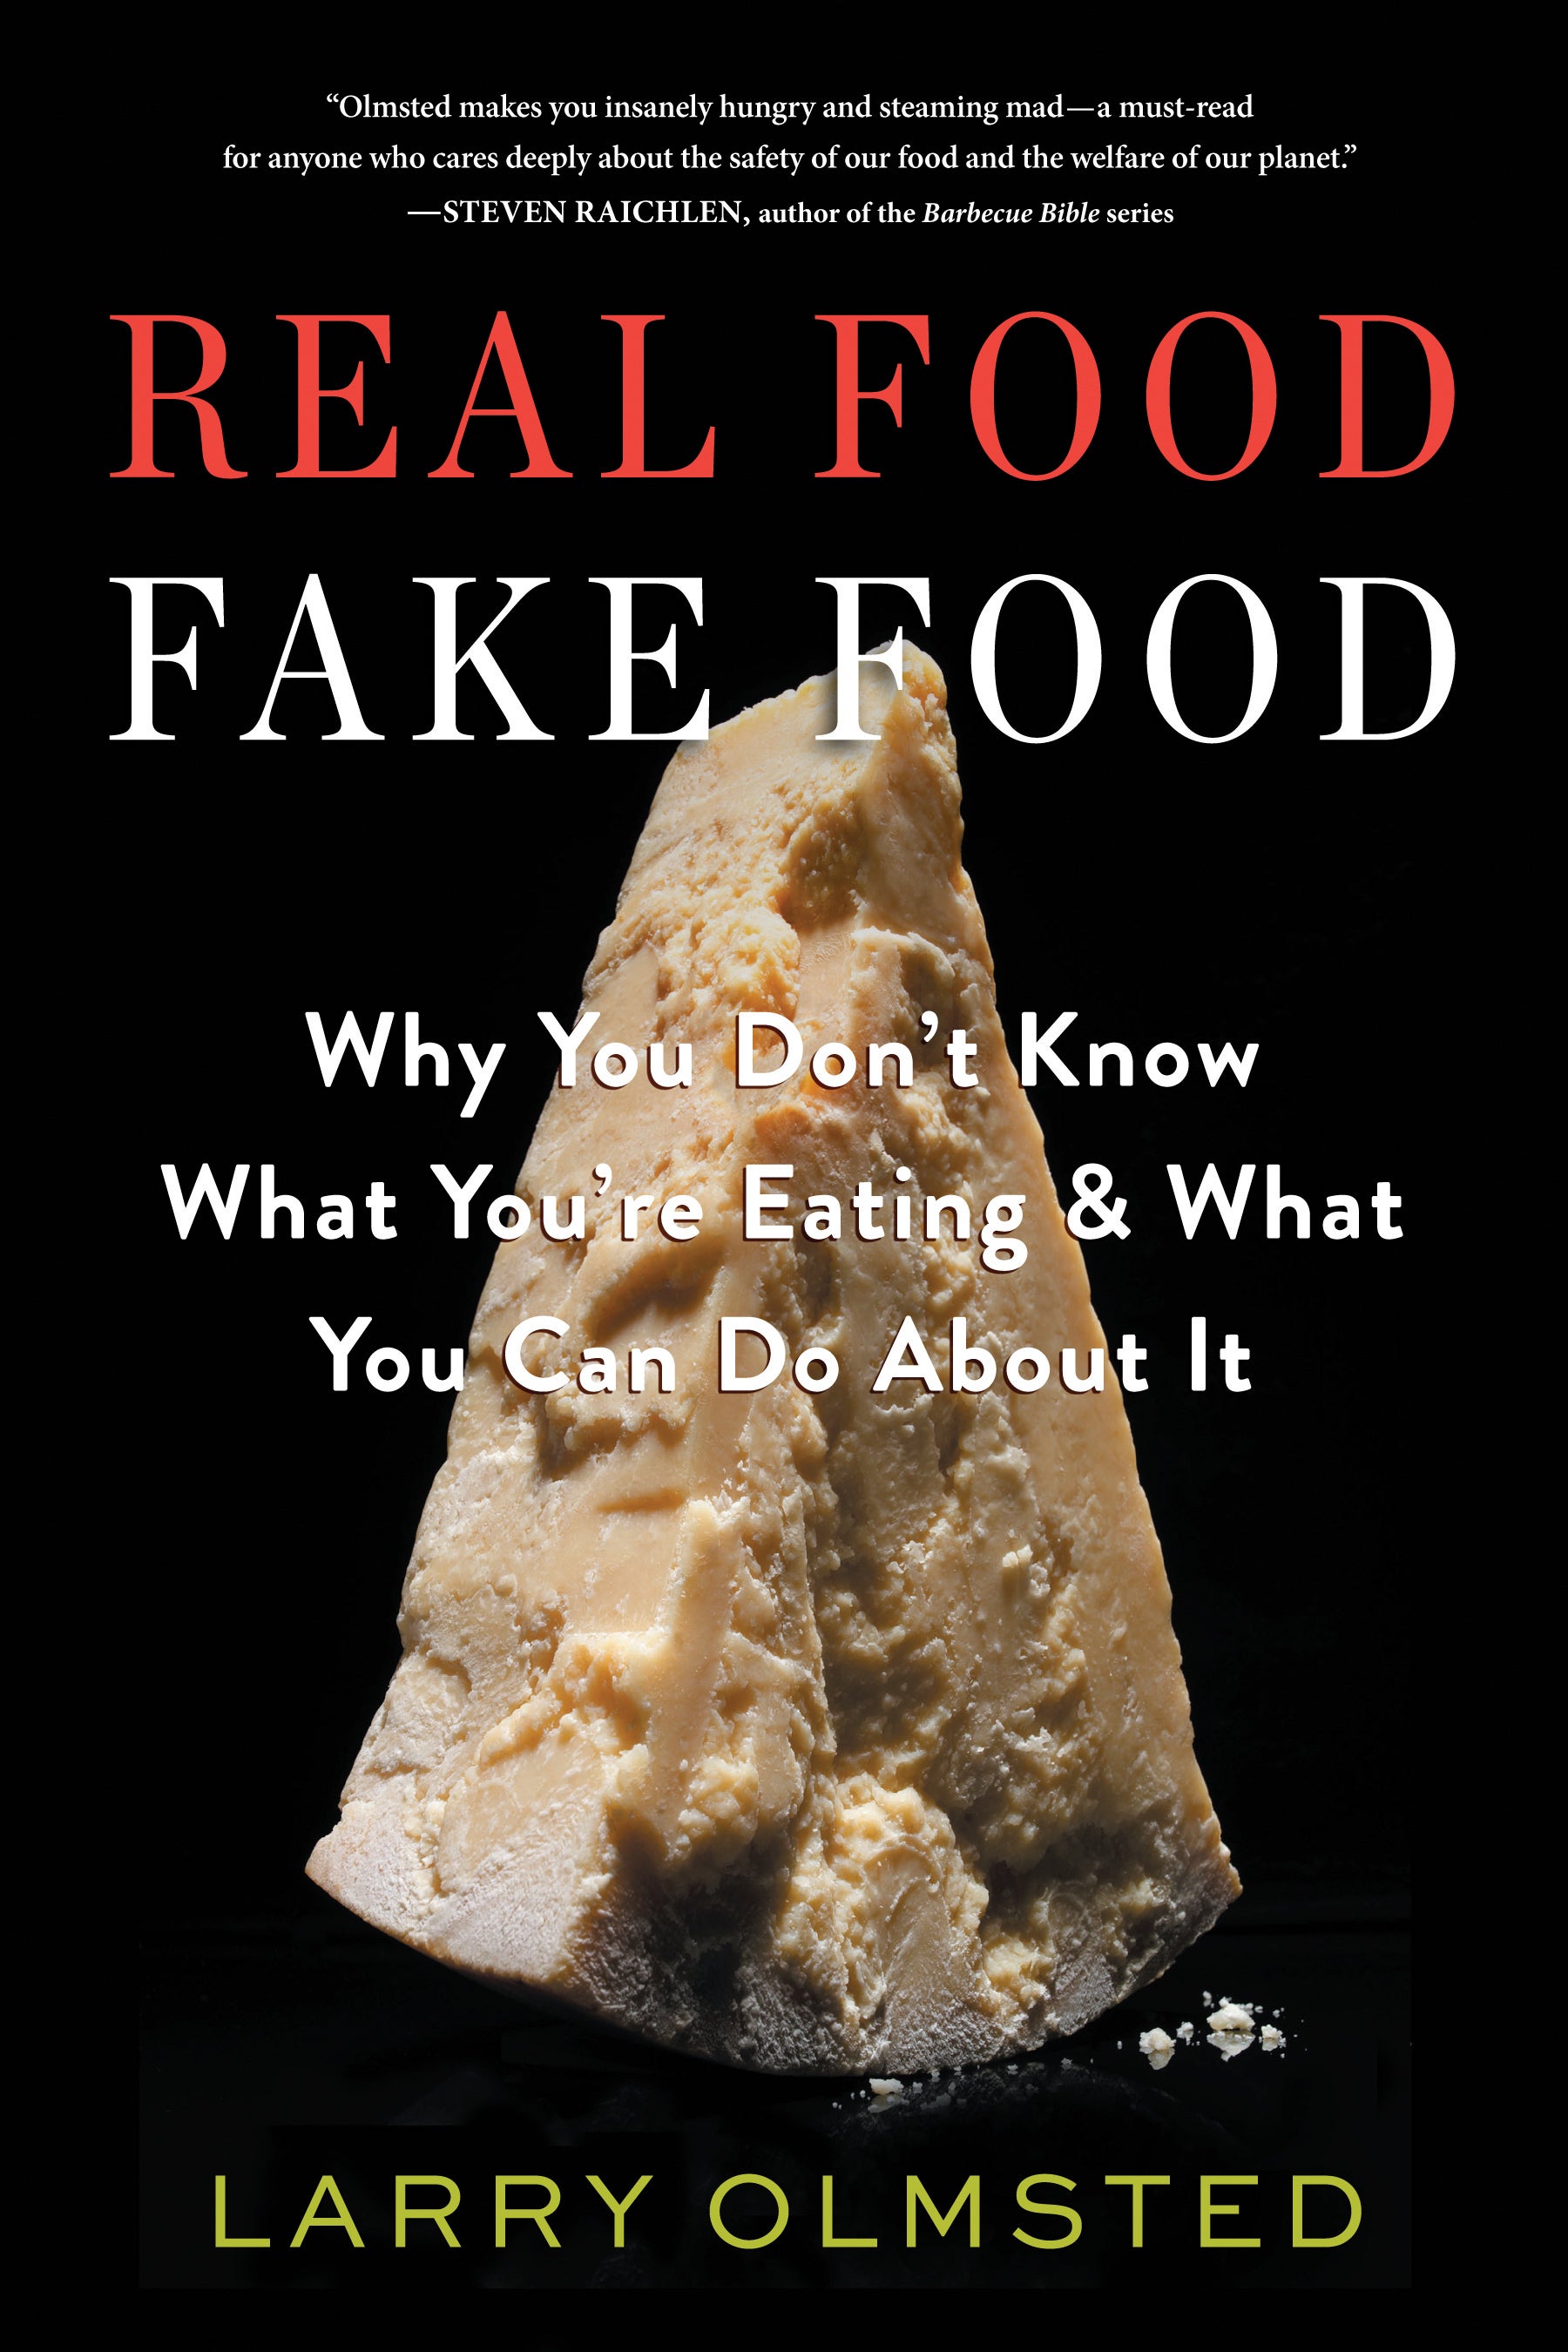 Real Food/Fake Food: Why You Don’t Know What You’re Eating & What You Can Do About It book cover